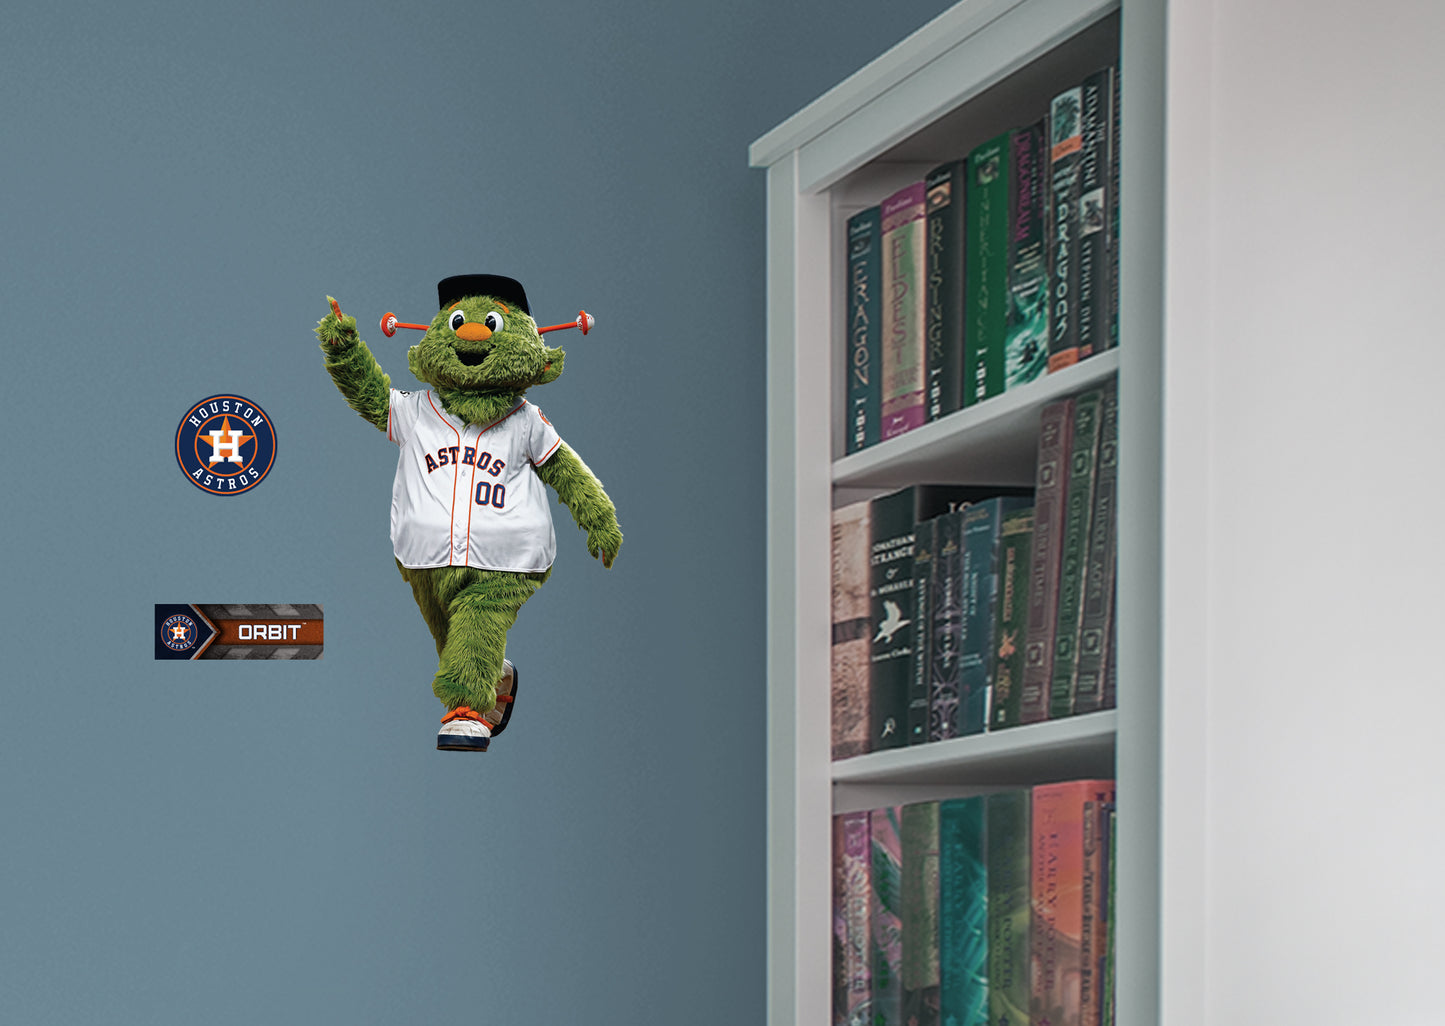 Houston Astros: Orbit 2021 Mascot - Officially Licensed MLB Removable –  Fathead